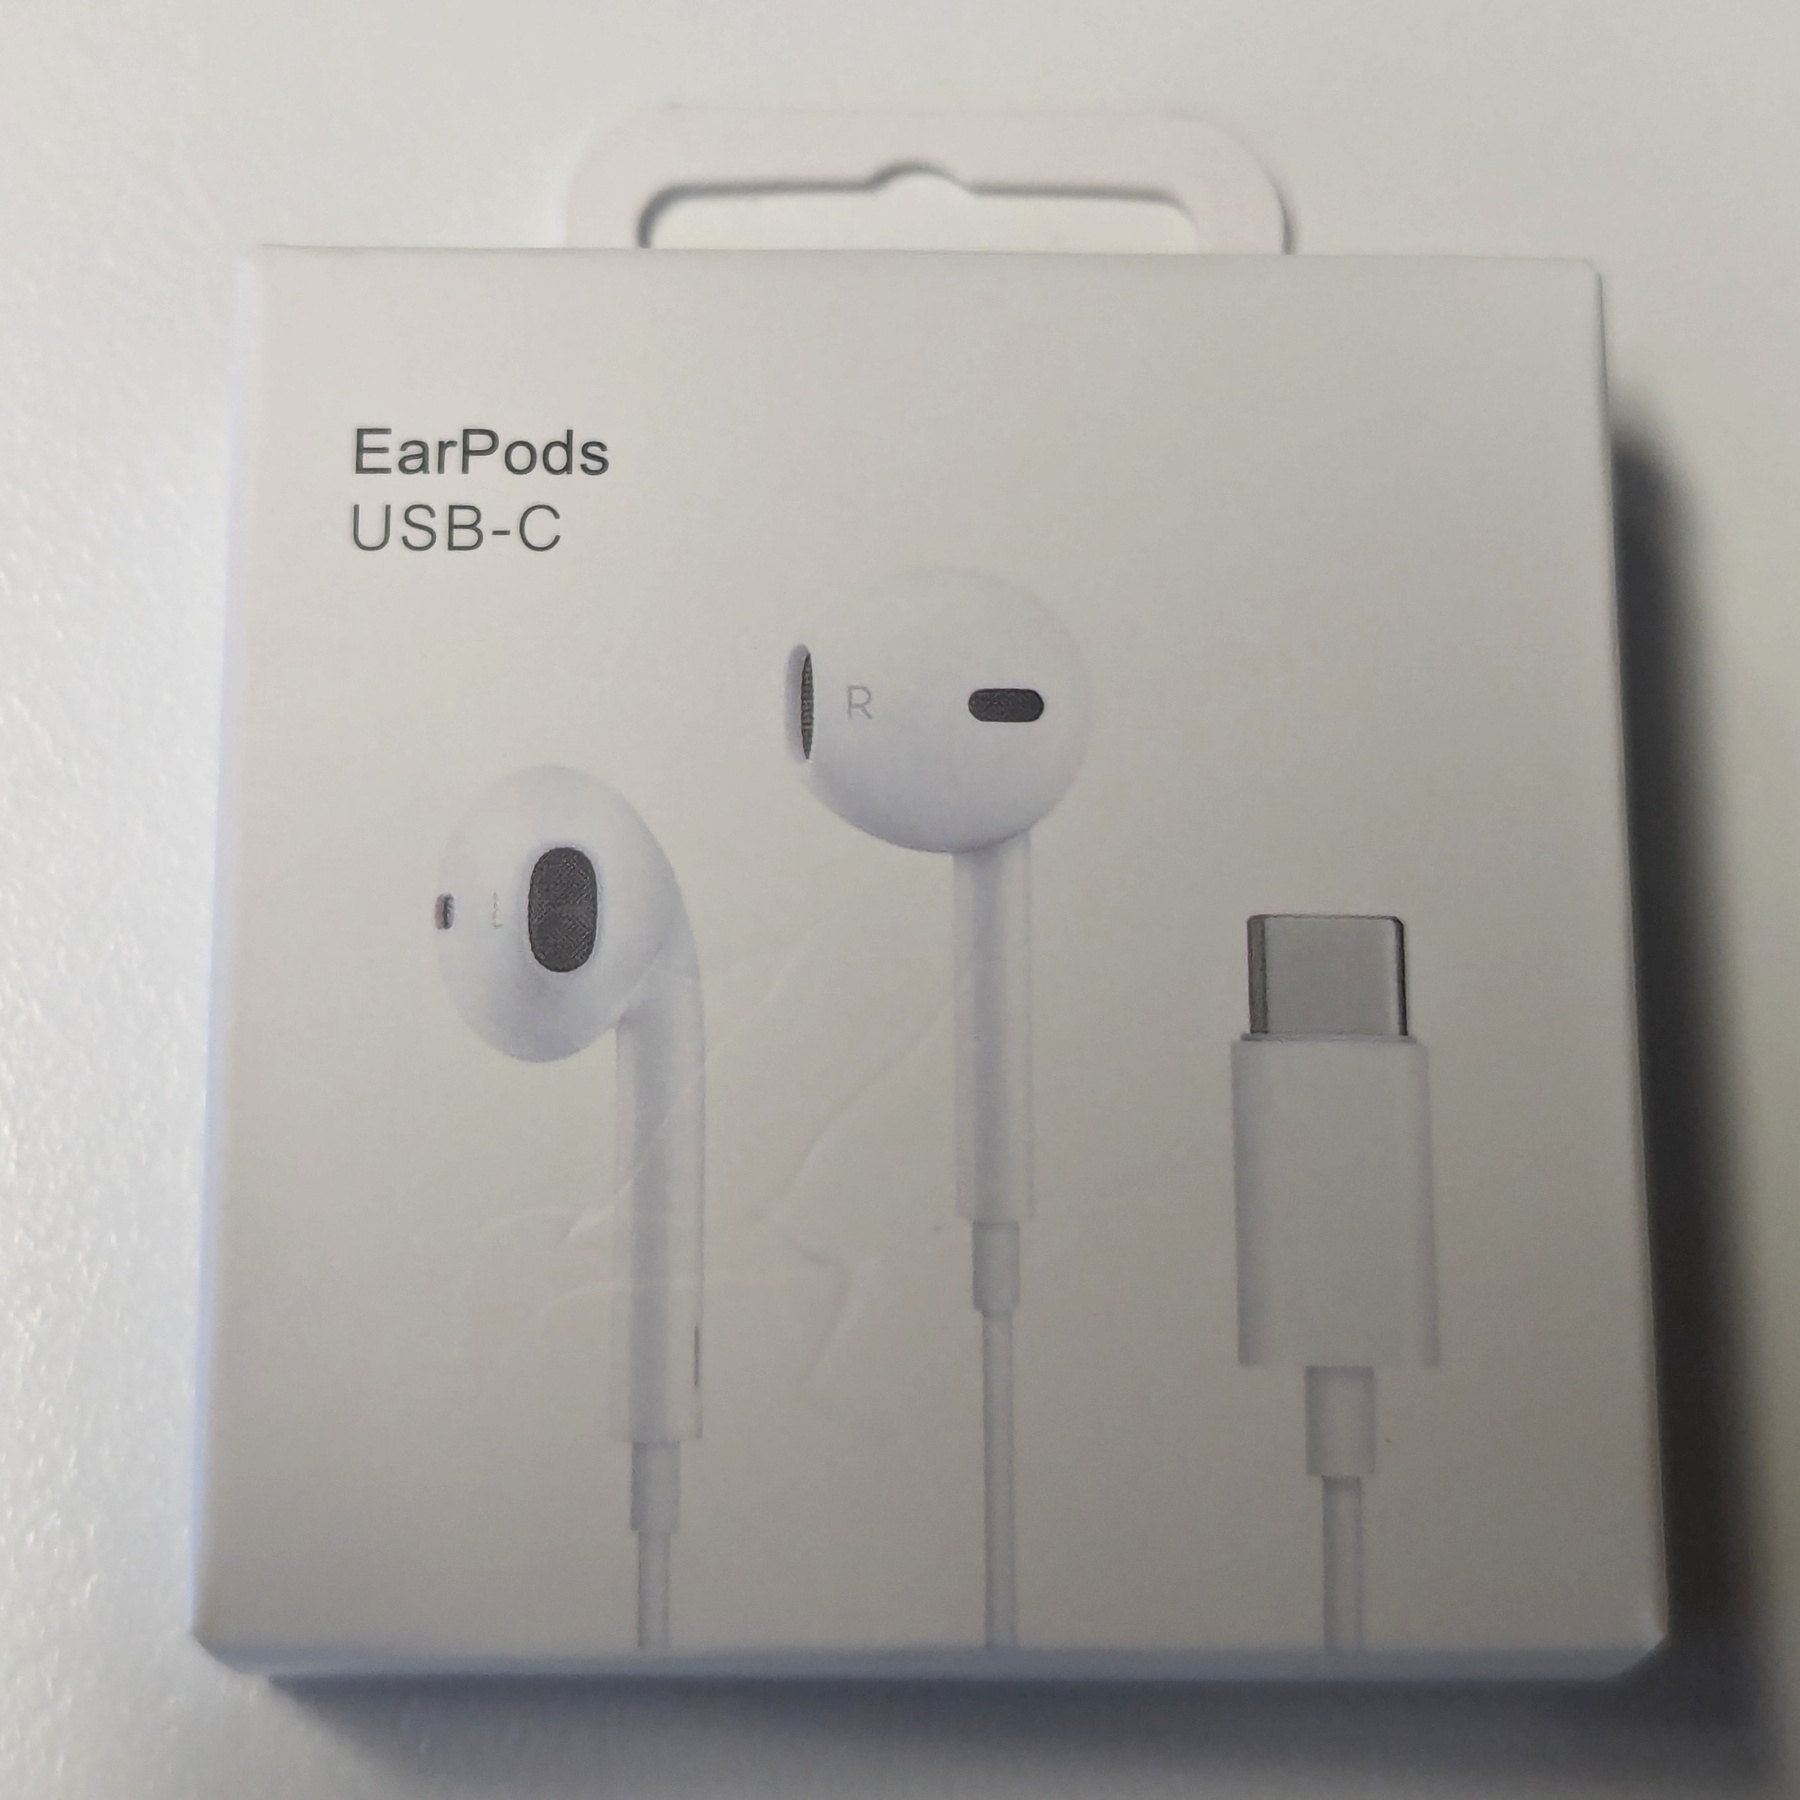 A box of white USB-C earbuds in a box with the name EarPods.